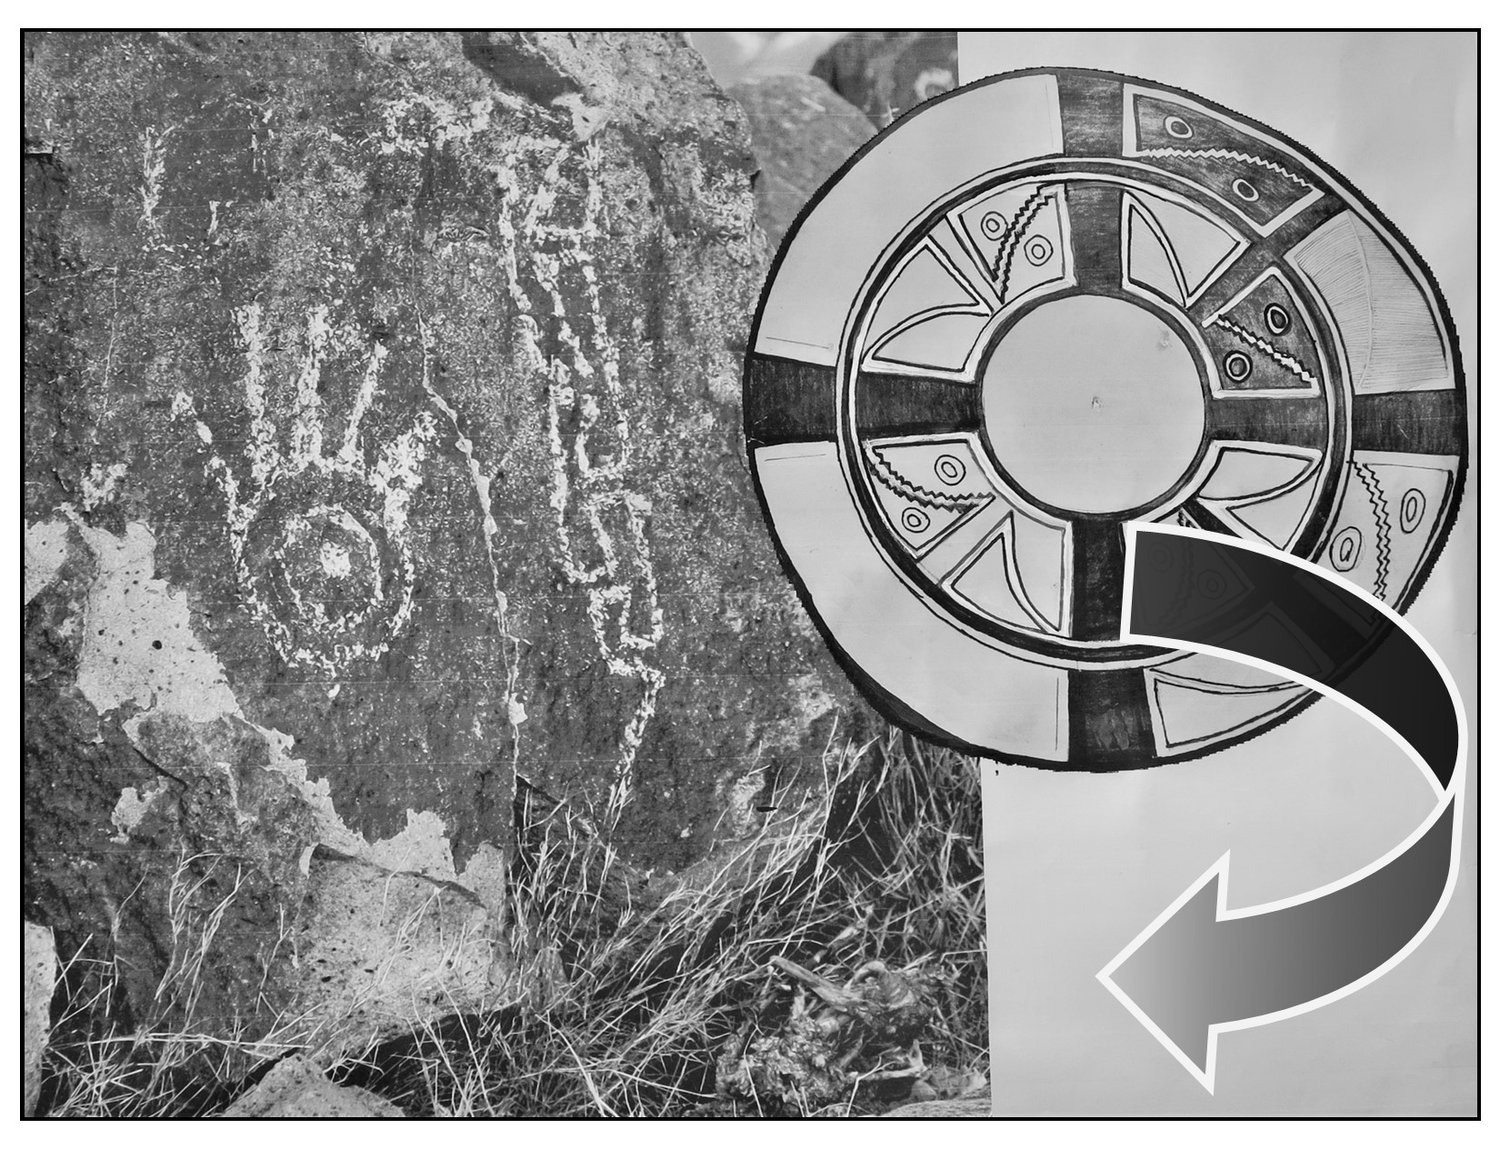 During Winter Solstice, at A Mimbres-style petroglyph of a vertical open-ended chain mirrors the chain in a closed circle in a Mimbres painted bowl. The painters’ skills in geometry and symmetry often transform flat images to three-dimensional images.mid-morning, the shadow from a casting stone bisects the human hand with a concentric circle and point motif. Simultaneously, a small circle with a point in its center at the end of a vertical square-chain motif is also bisected.